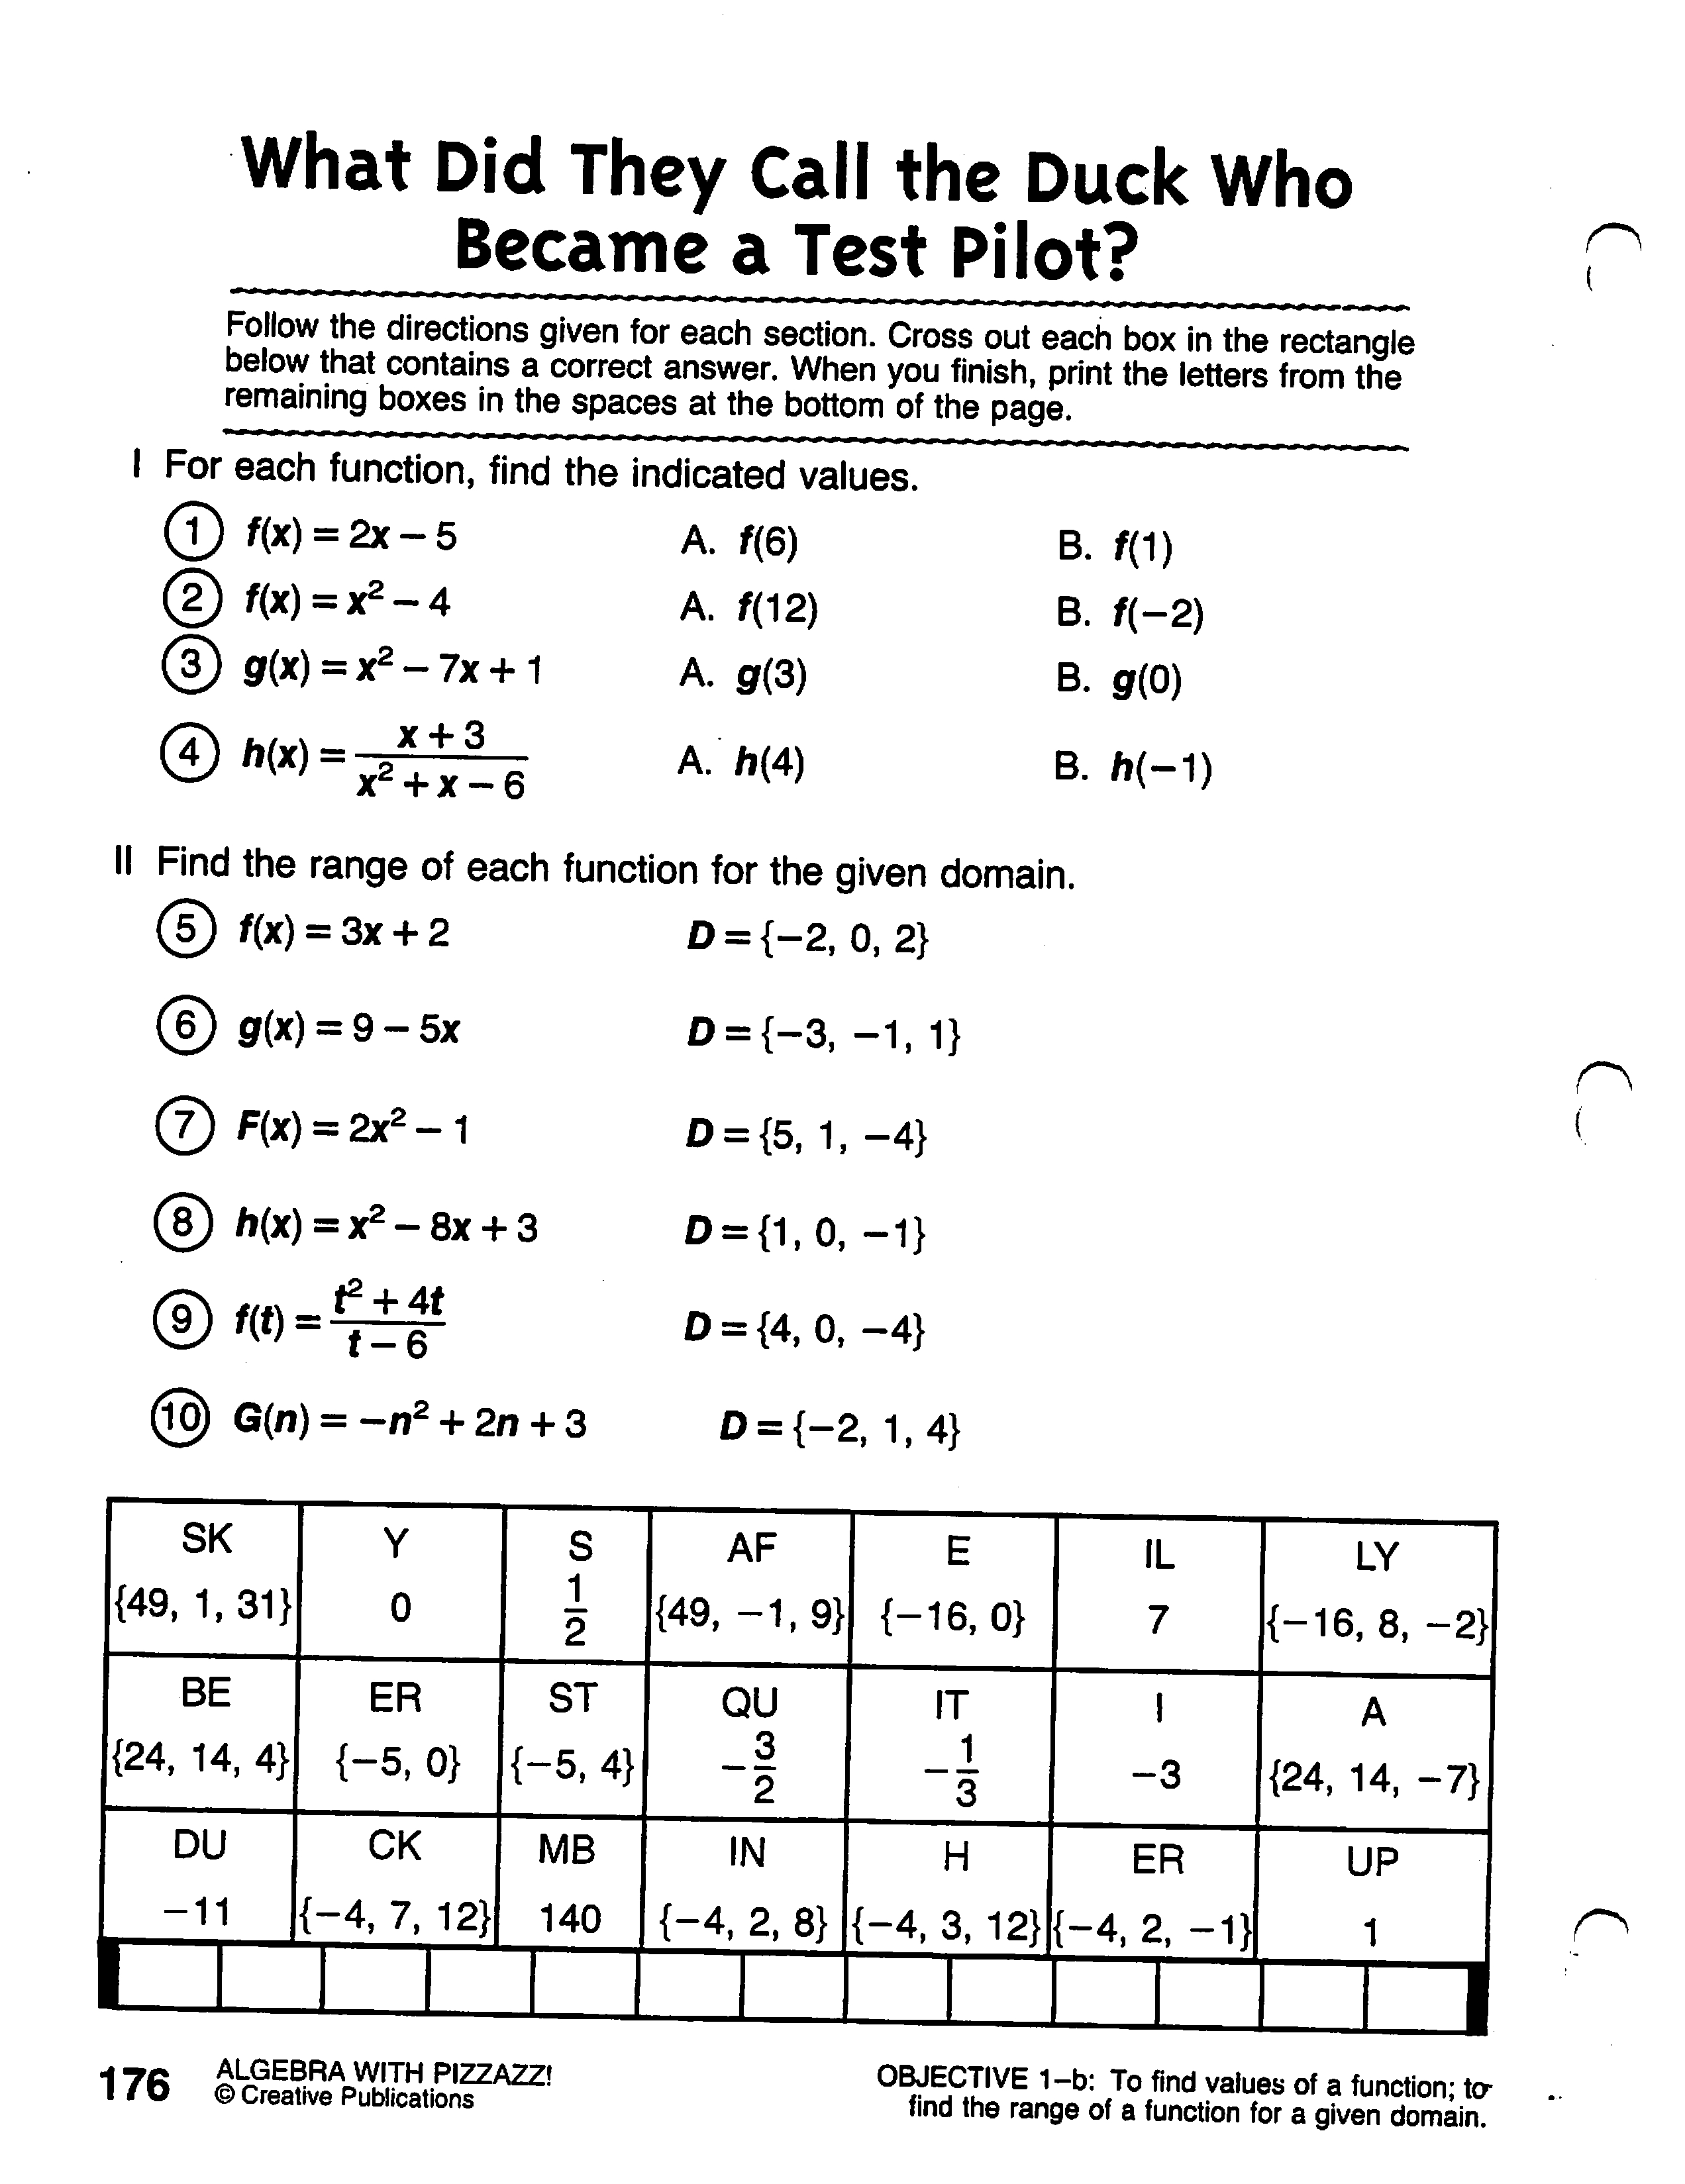 12 Best Images of Function Notation Algebra Worksheets  Function Notation Algebra 1 Worksheet 